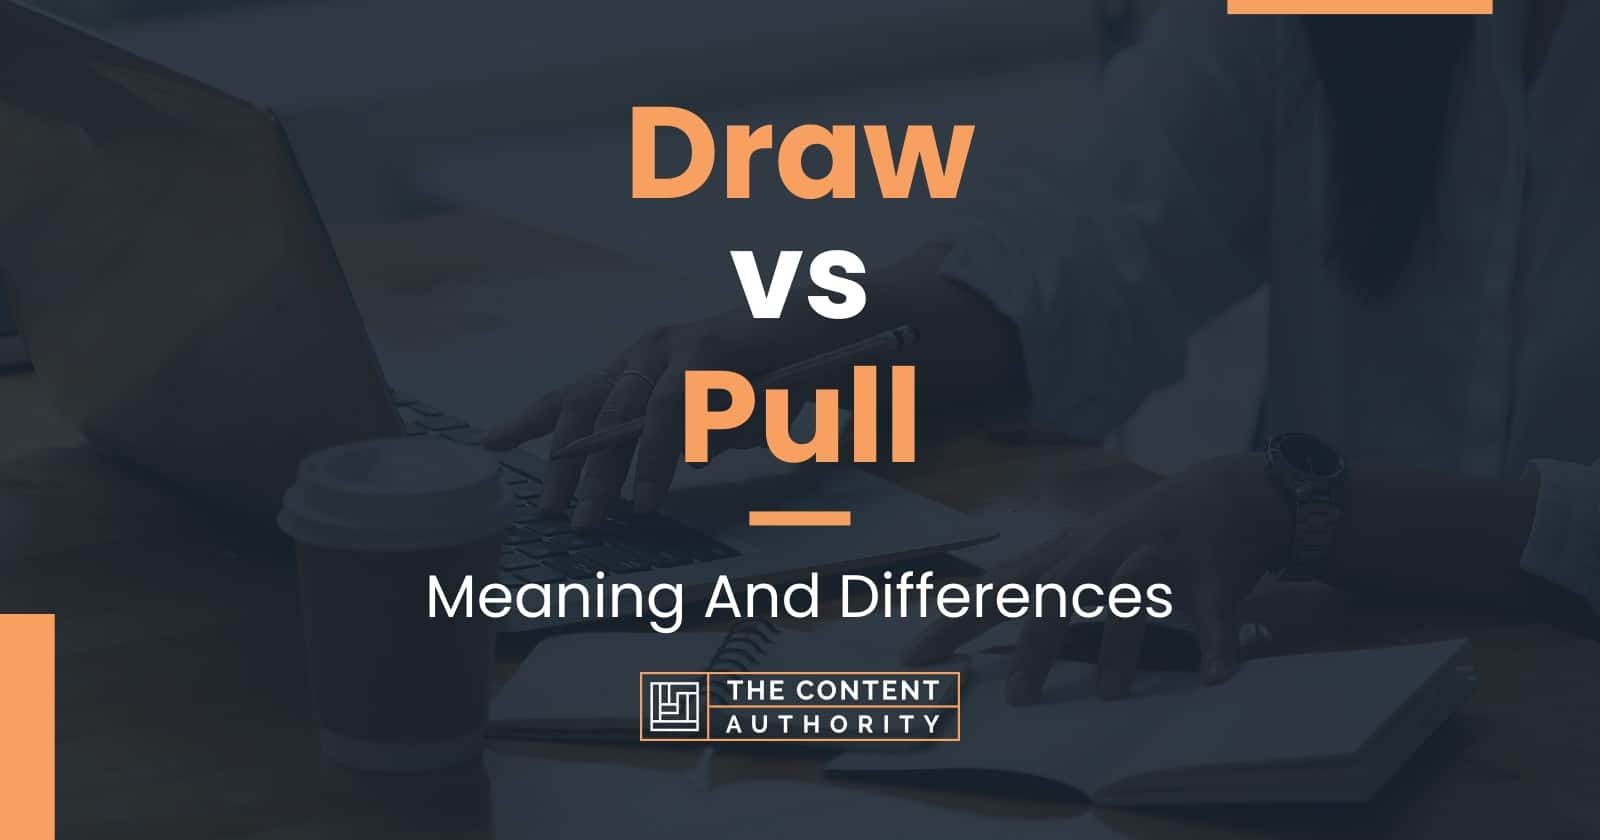 Draw vs Pull Meaning And Differences